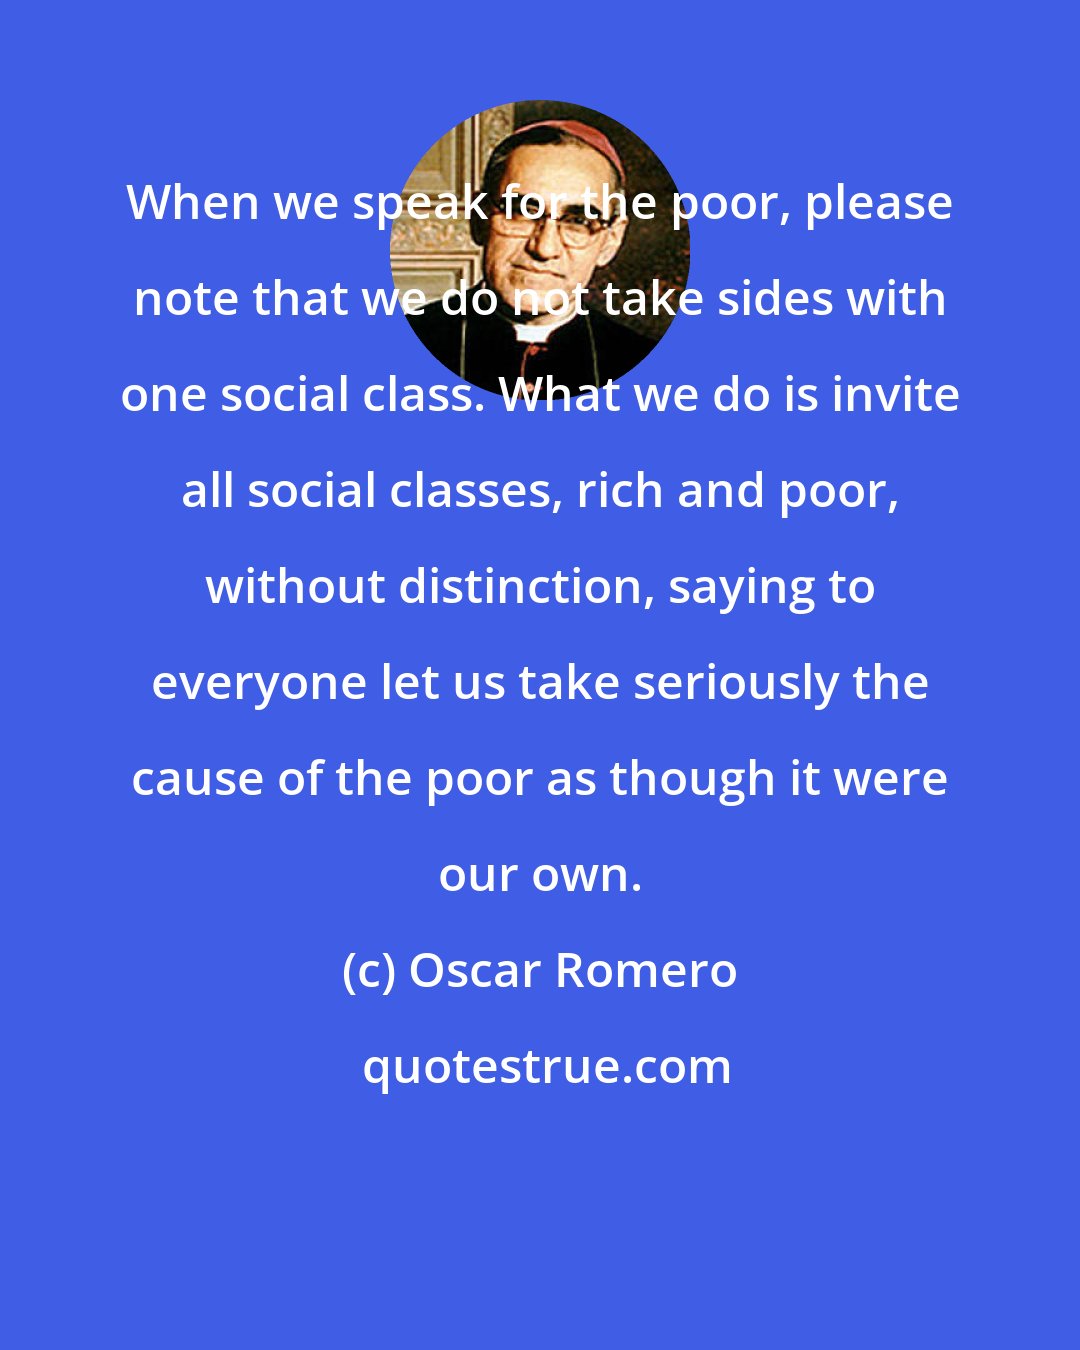 Oscar Romero: When we speak for the poor, please note that we do not take sides with one social class. What we do is invite all social classes, rich and poor, without distinction, saying to everyone let us take seriously the cause of the poor as though it were our own.